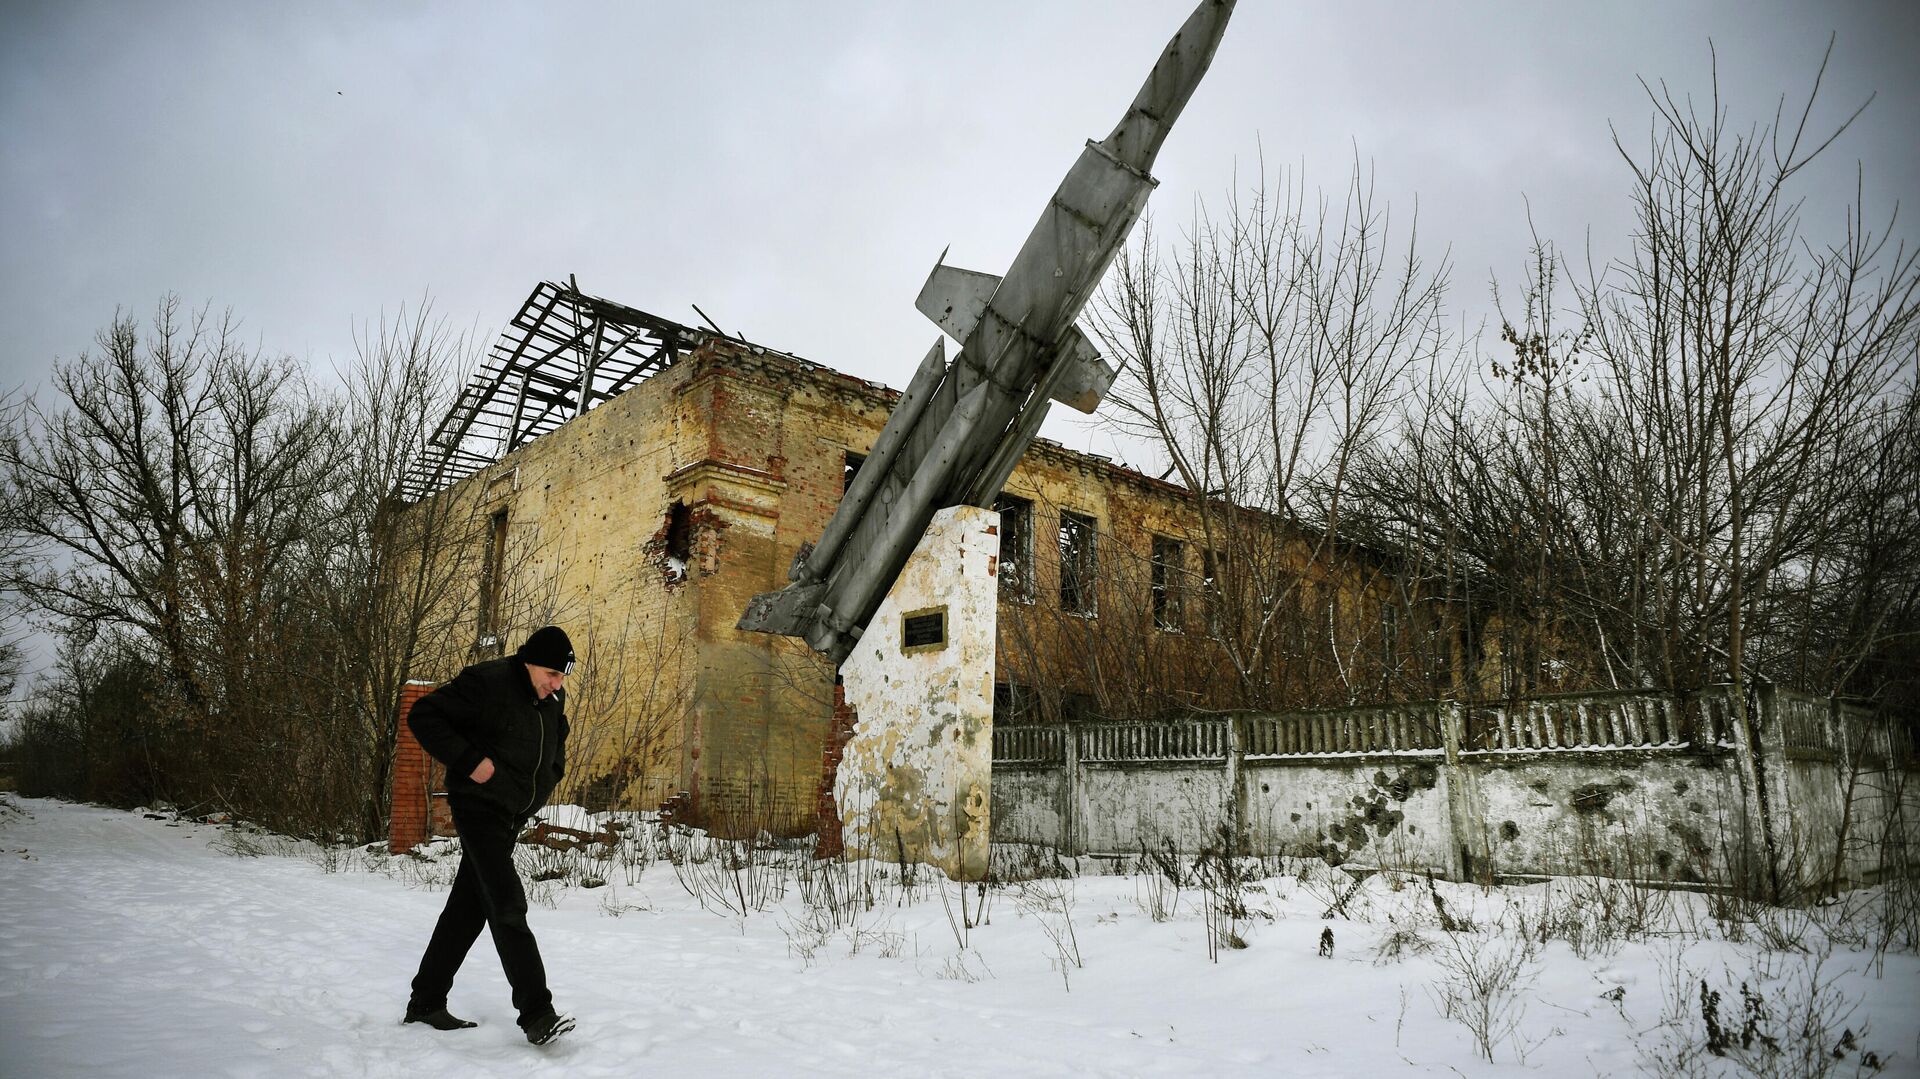 A man walks past a destroyed building of a former military installation in the village of Vesyoloye, suburb of Donetsk, capital of a self-proclaimed Donetsk People's Republic (DPR) in eastern Ukraine - Sputnik International, 1920, 21.02.2022